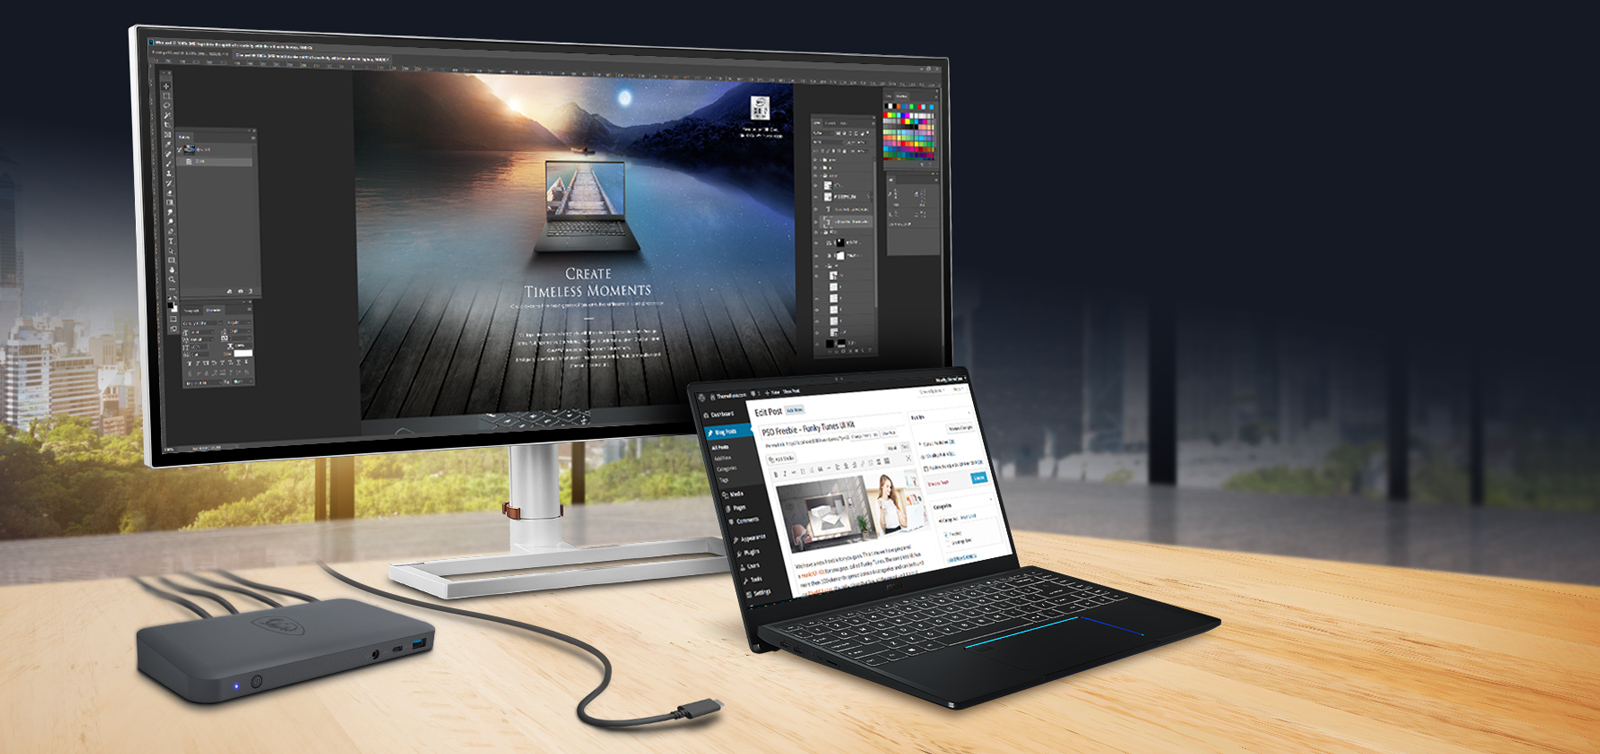 A Docking Station and Display Can Connect to MSI Prestige 15 via Thunderbolt 3